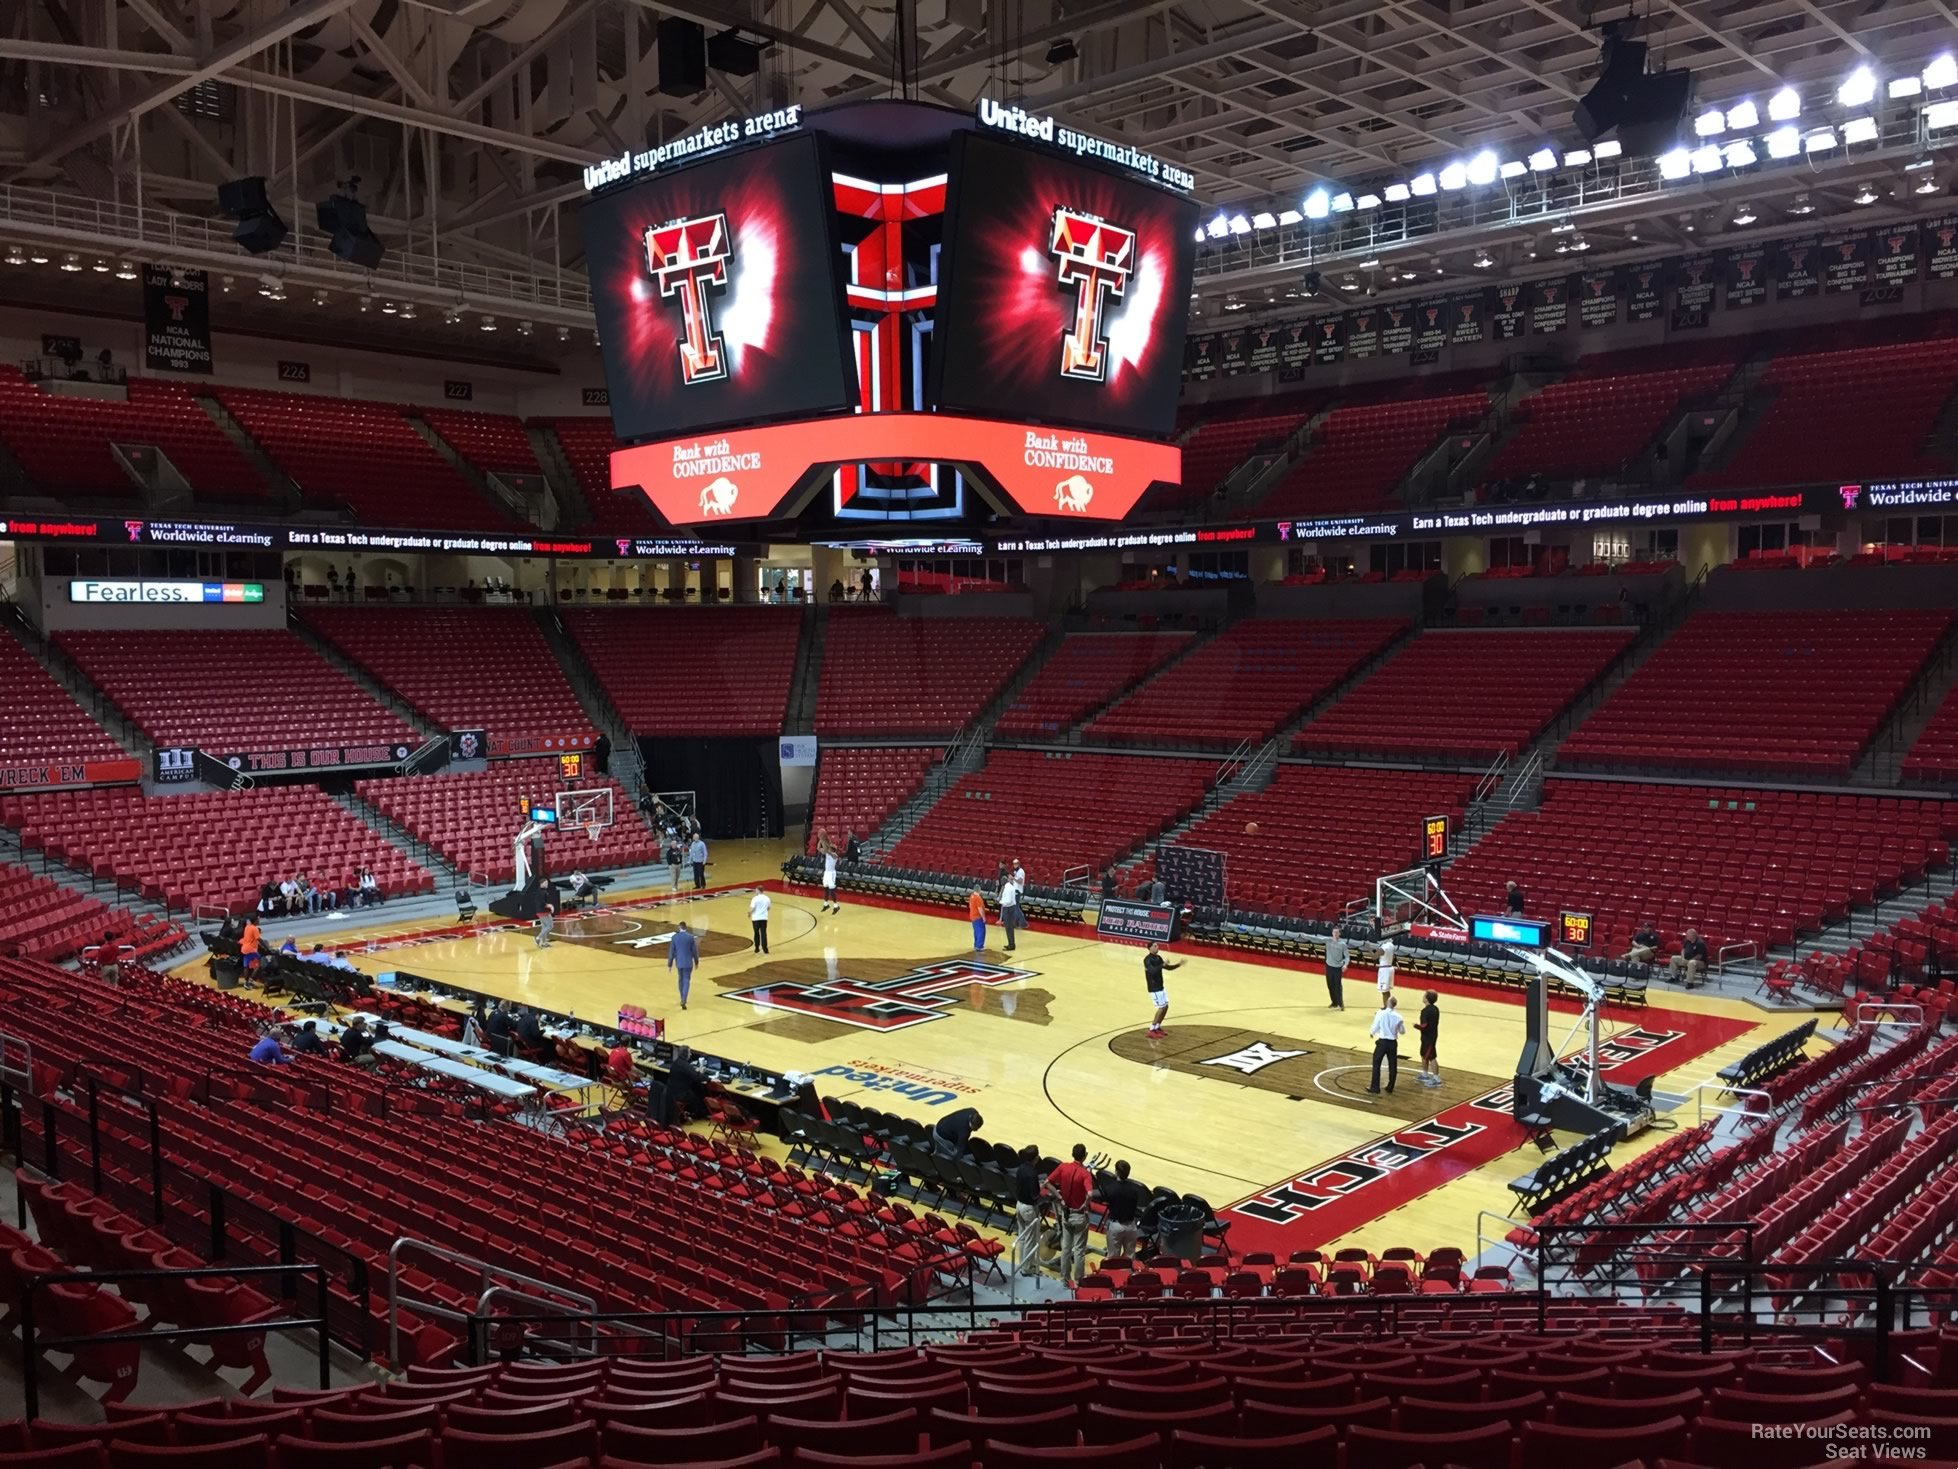 section 110, row 25 seat view  - united supermarkets arena